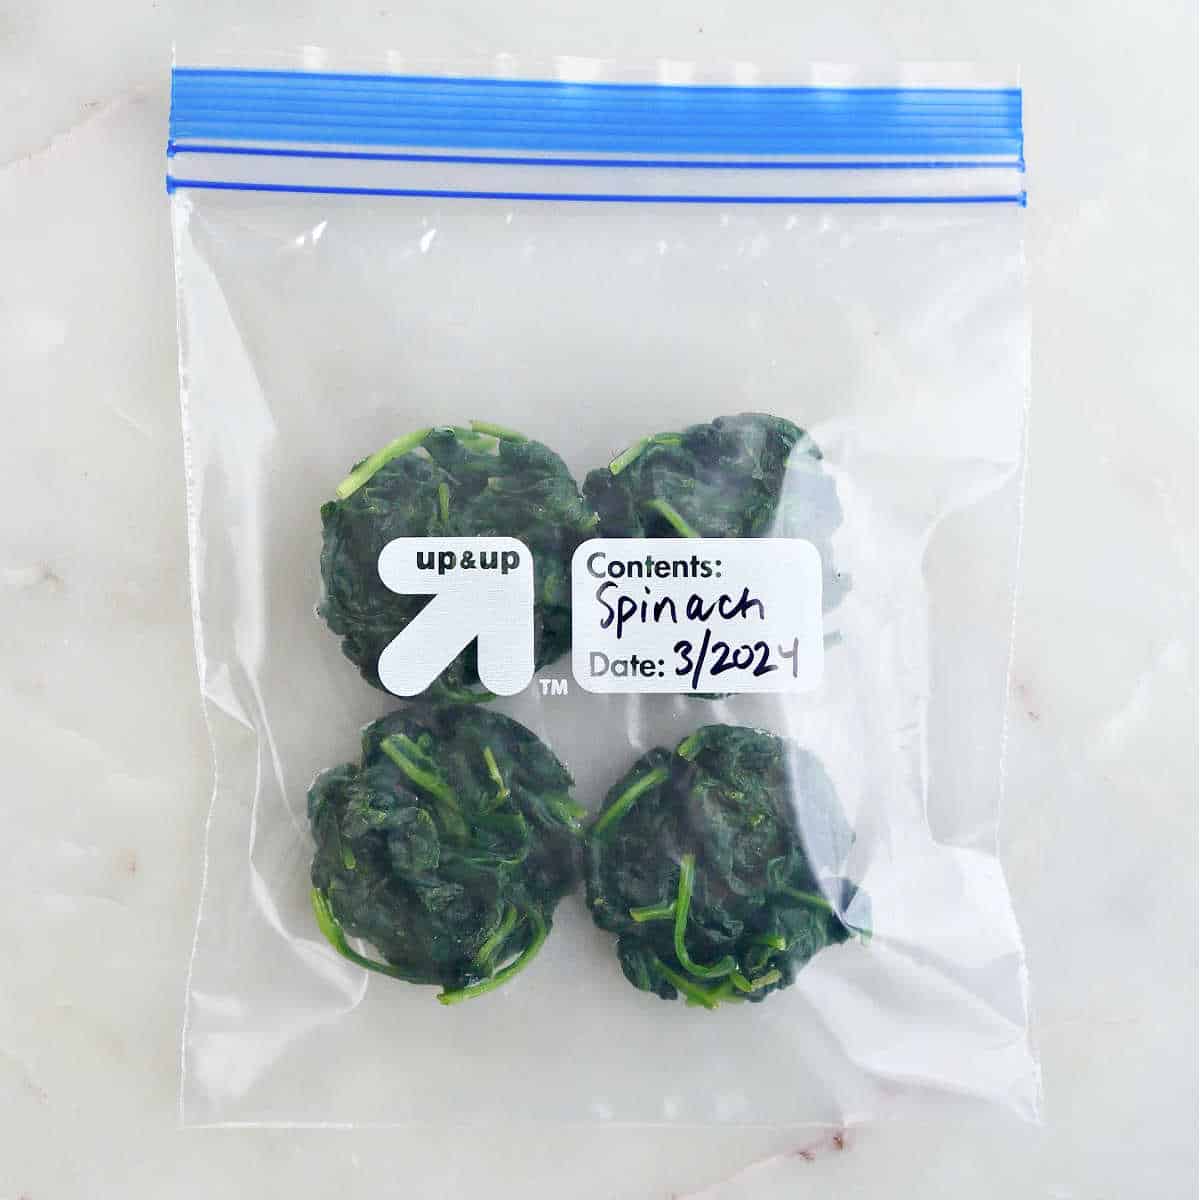 Frozen spinach in a labeled freezer bag.